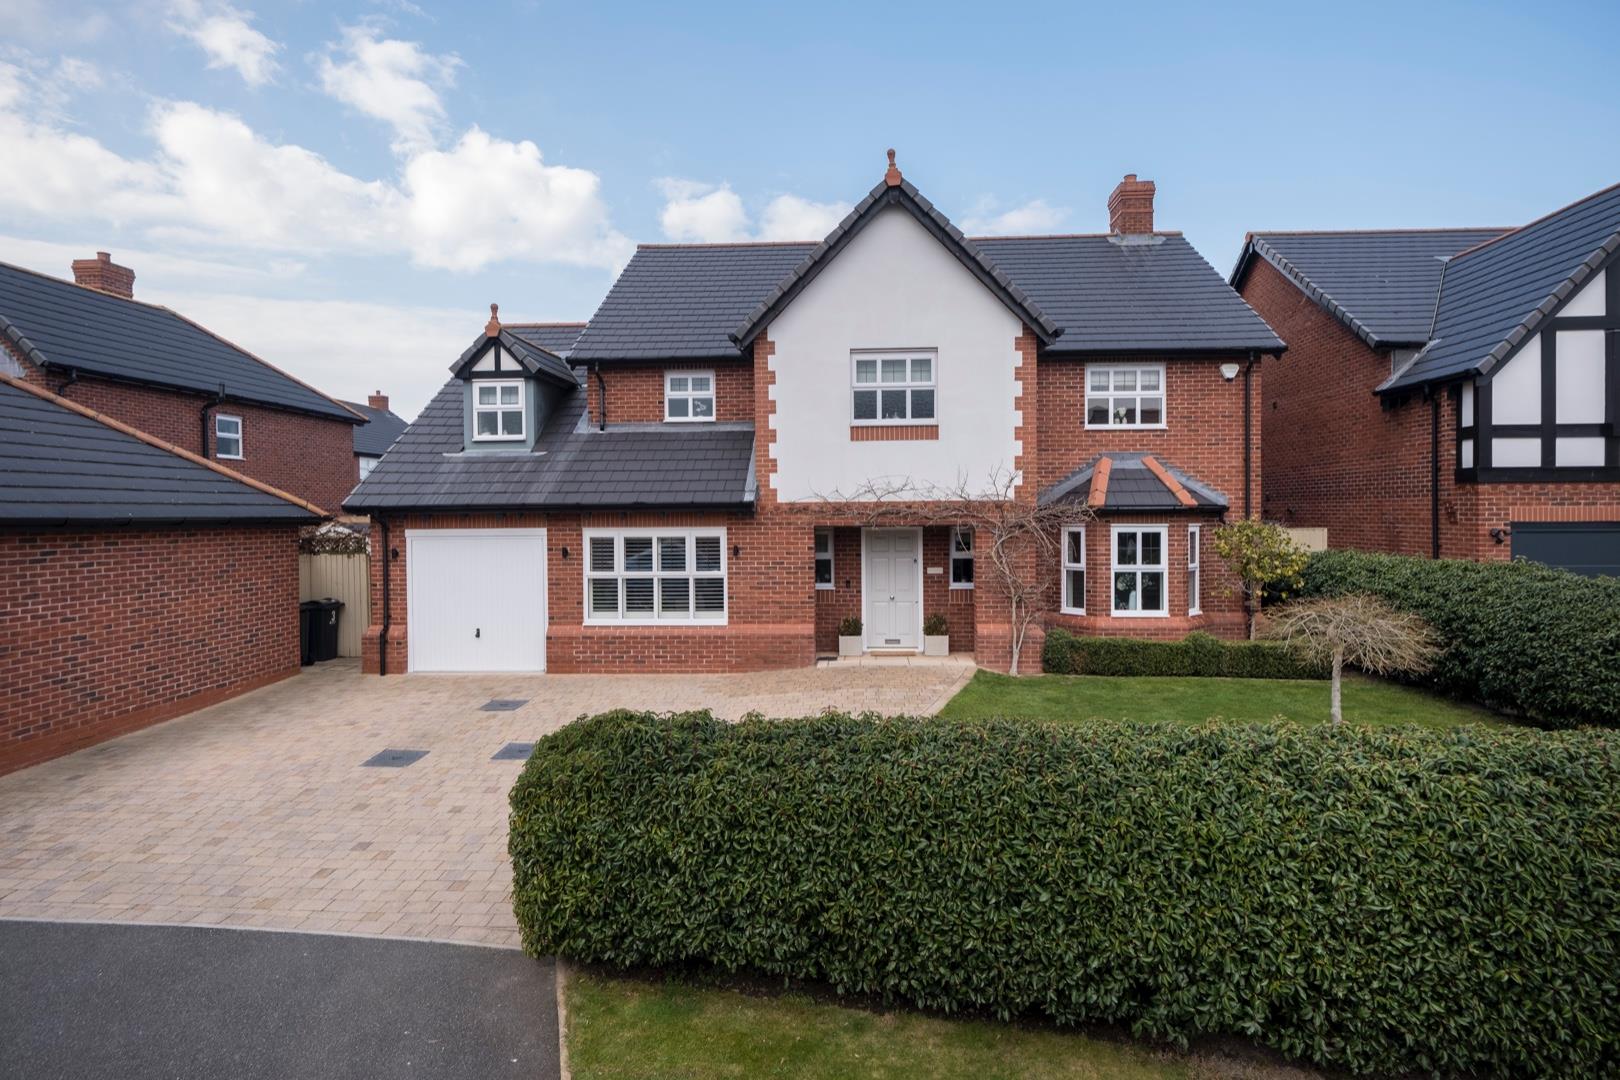 5 bedroom  Detached House for Sale in Saighton